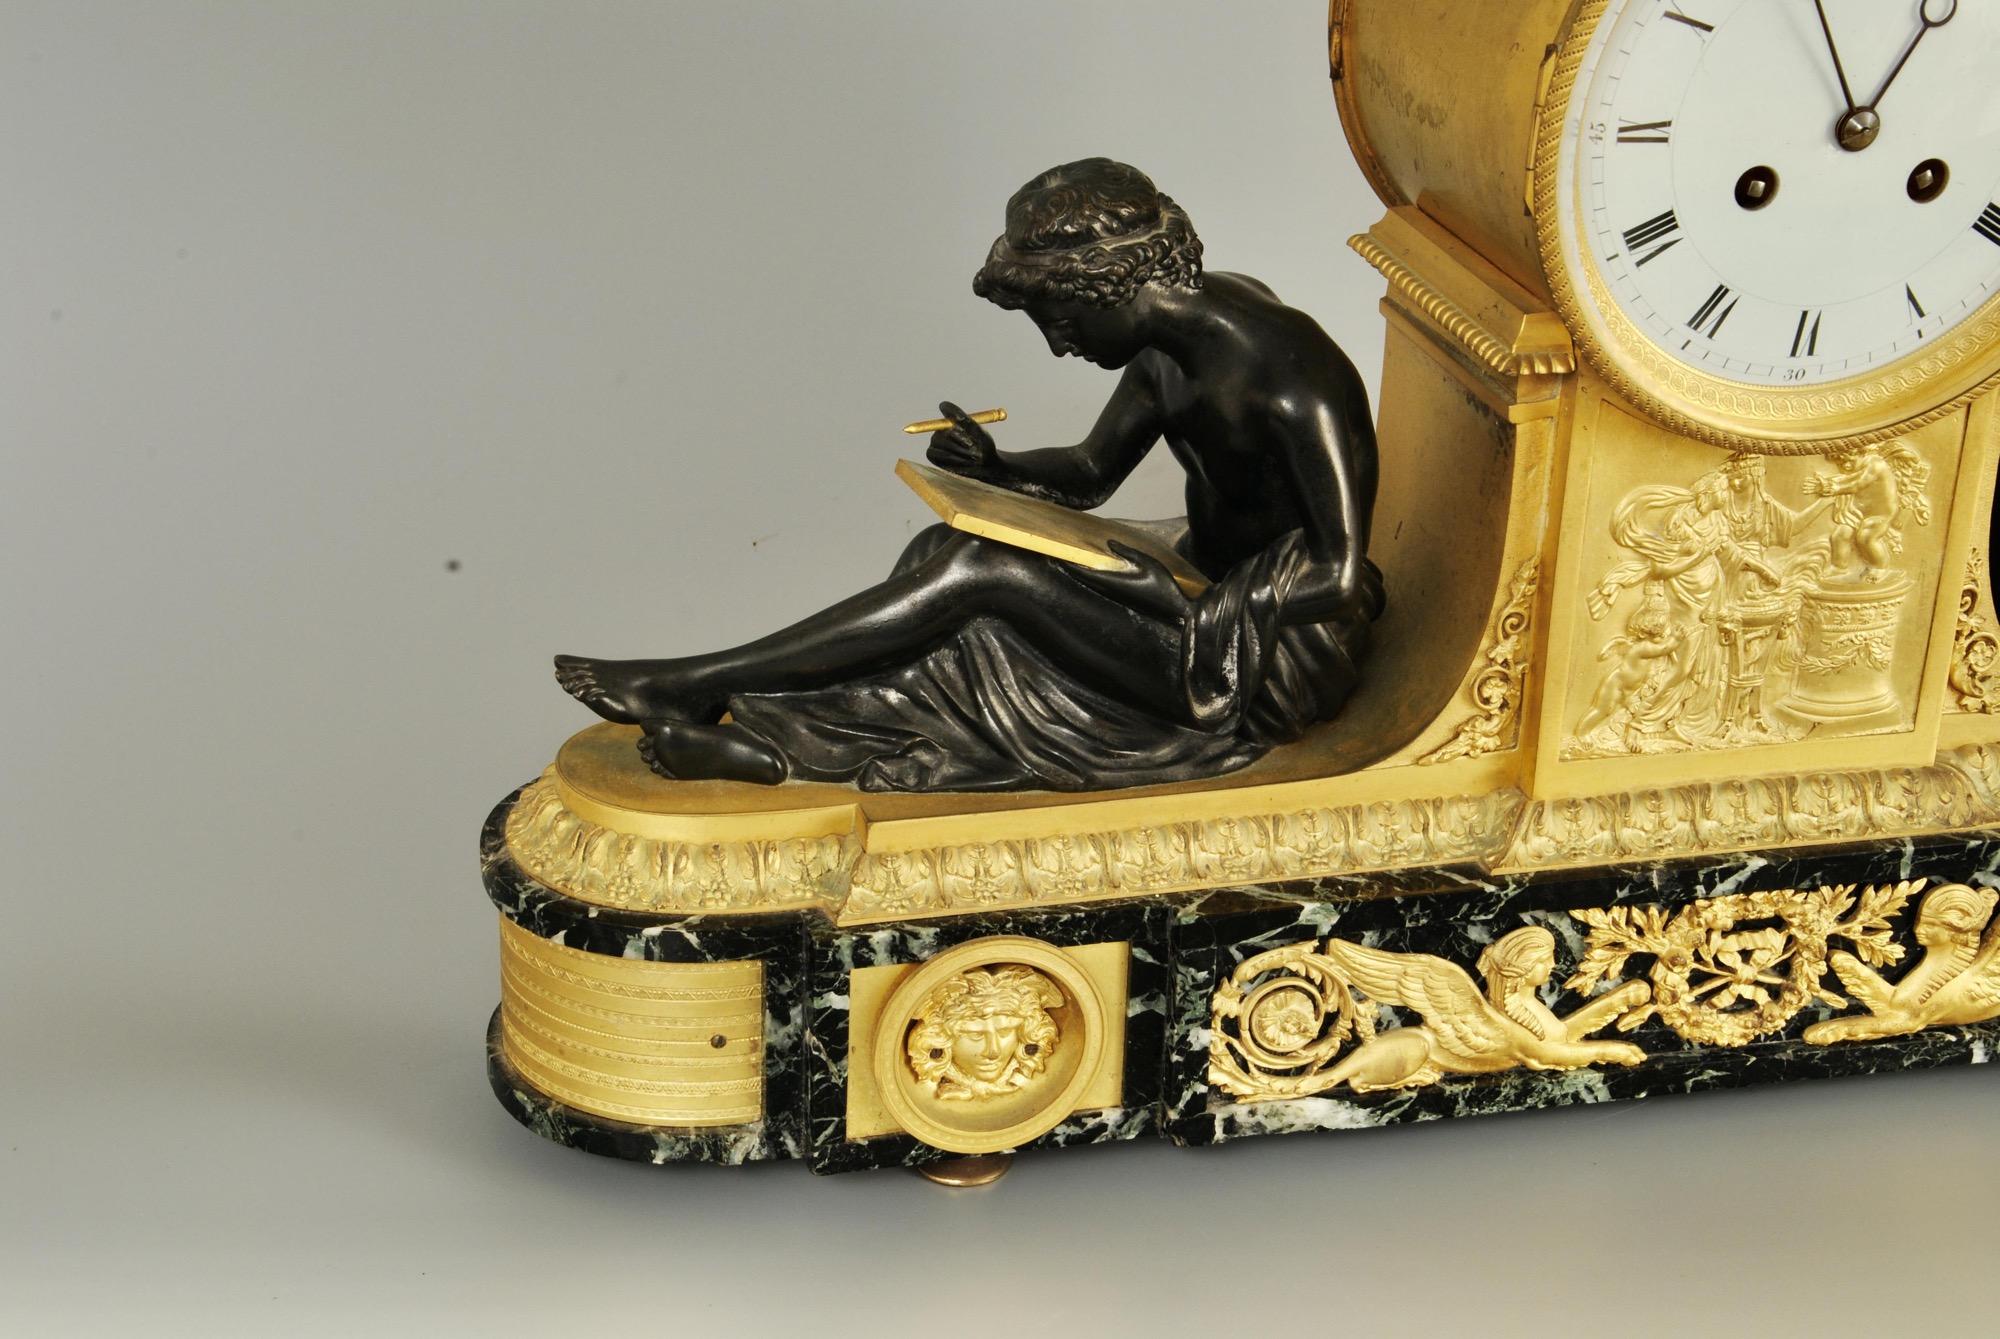 A stunning example of a 19th century French ormolu, bronze and marble mantle clock after the design by Francois Remond with the seated figures of Philosophy and Learning. The twin fusee movement with a 1855 medal stamp
Provenance with a private